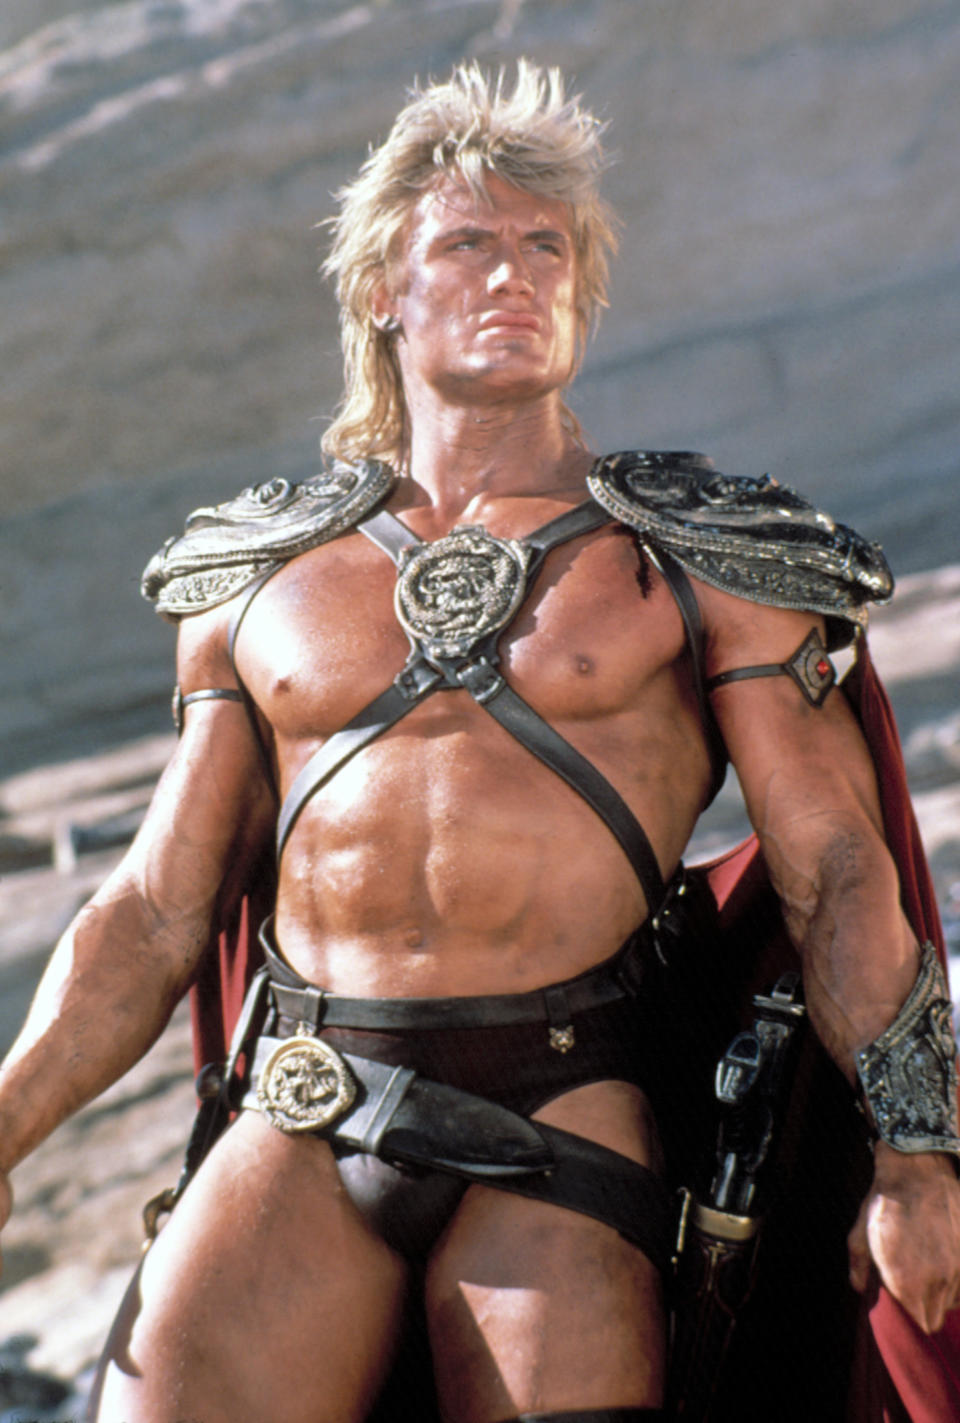 MASTERS OF THE UNIVERSE, Dolph Lundgren, 1987. ©Cannon Films/Courtesy Everett Collection